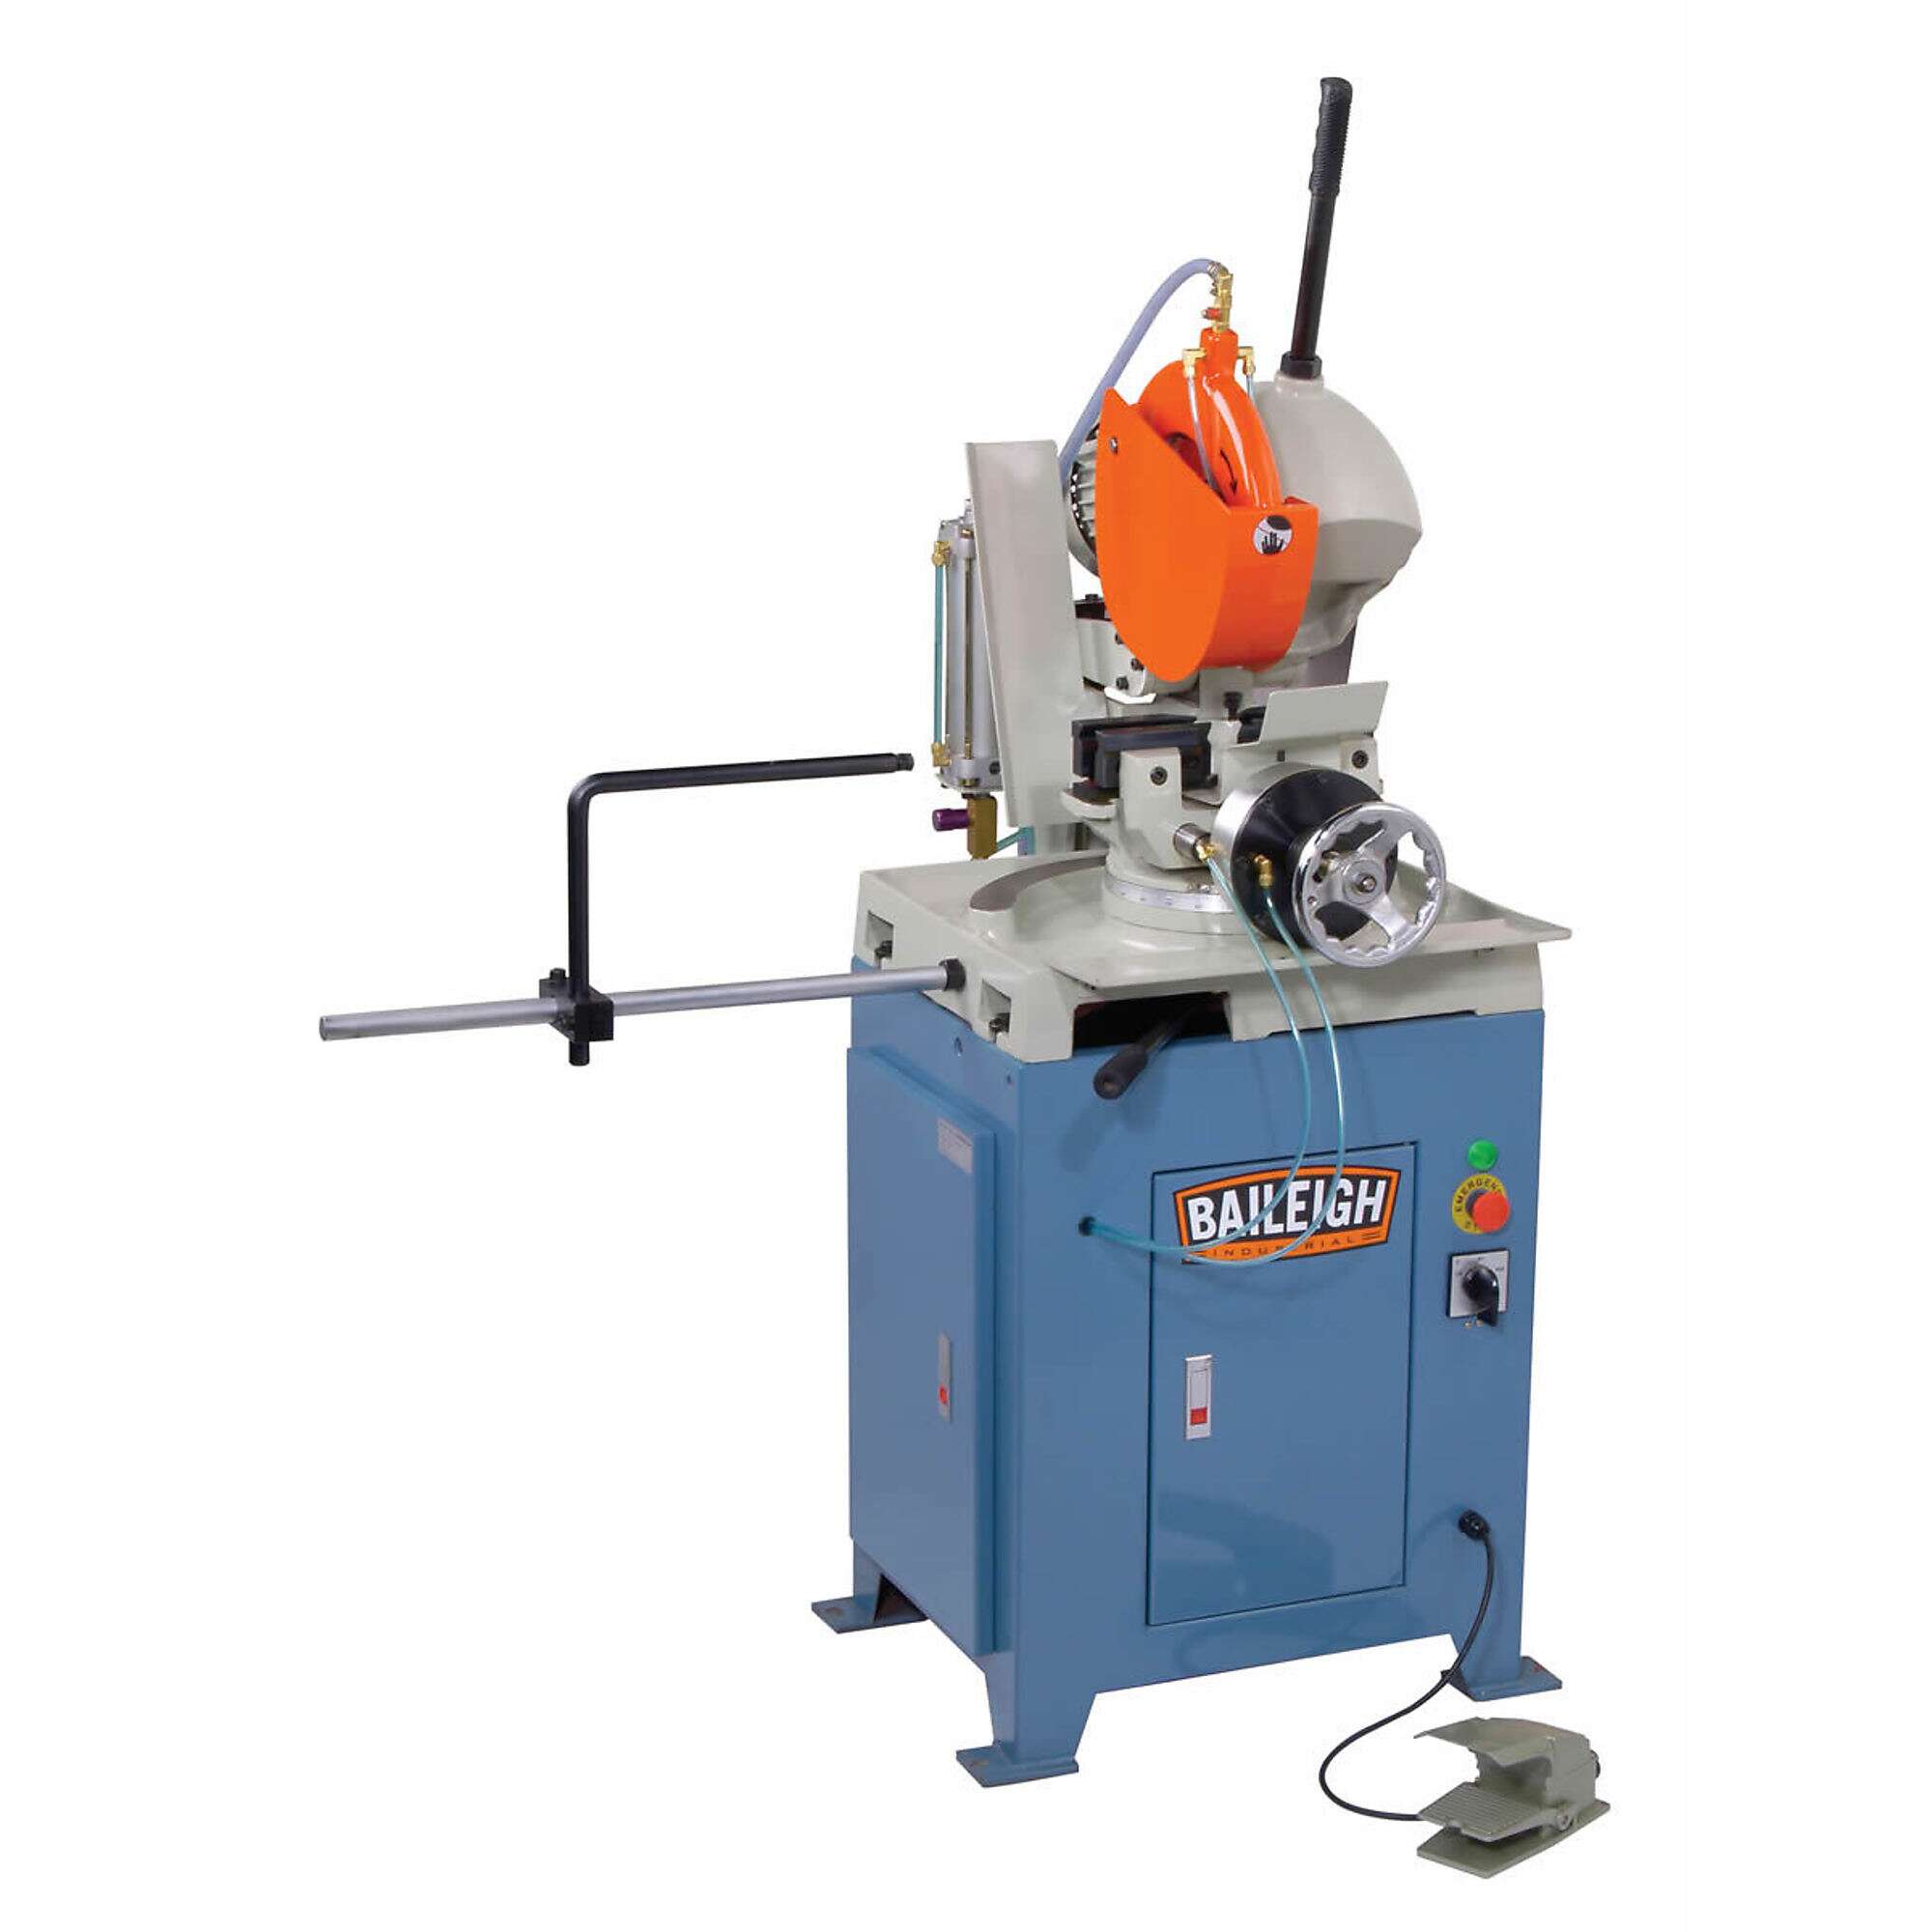 Baileigh Semi Automatic Cold Band Saw 11in Blade 3 HP Volts 220